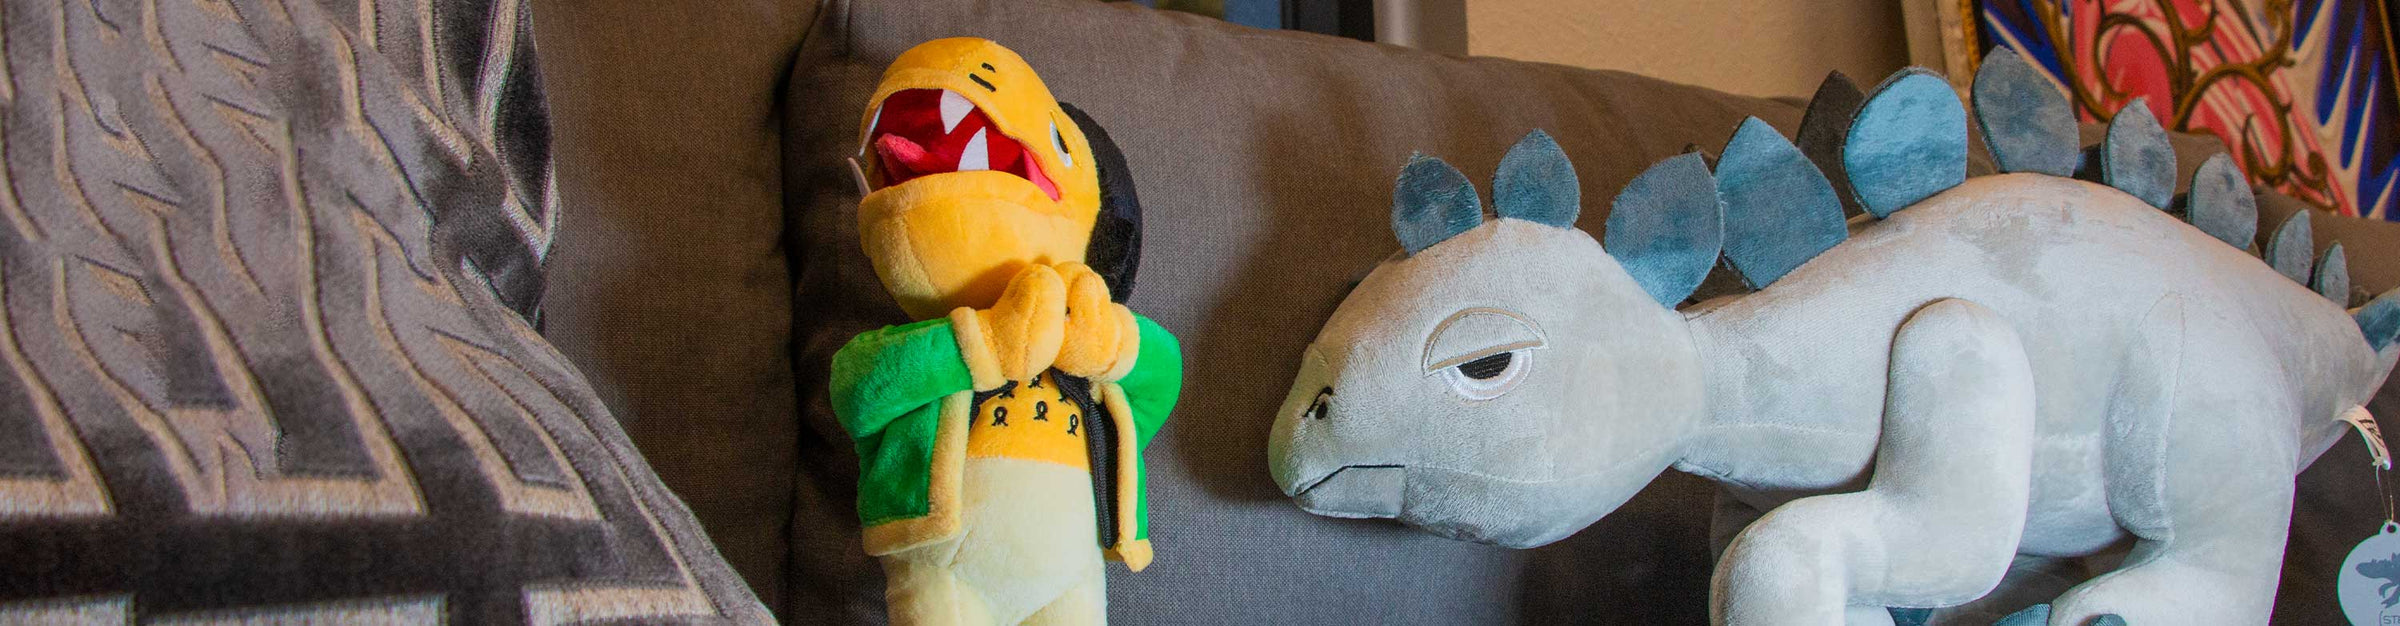 Wholesale Elbo Plush Figures sitting on couch inside office